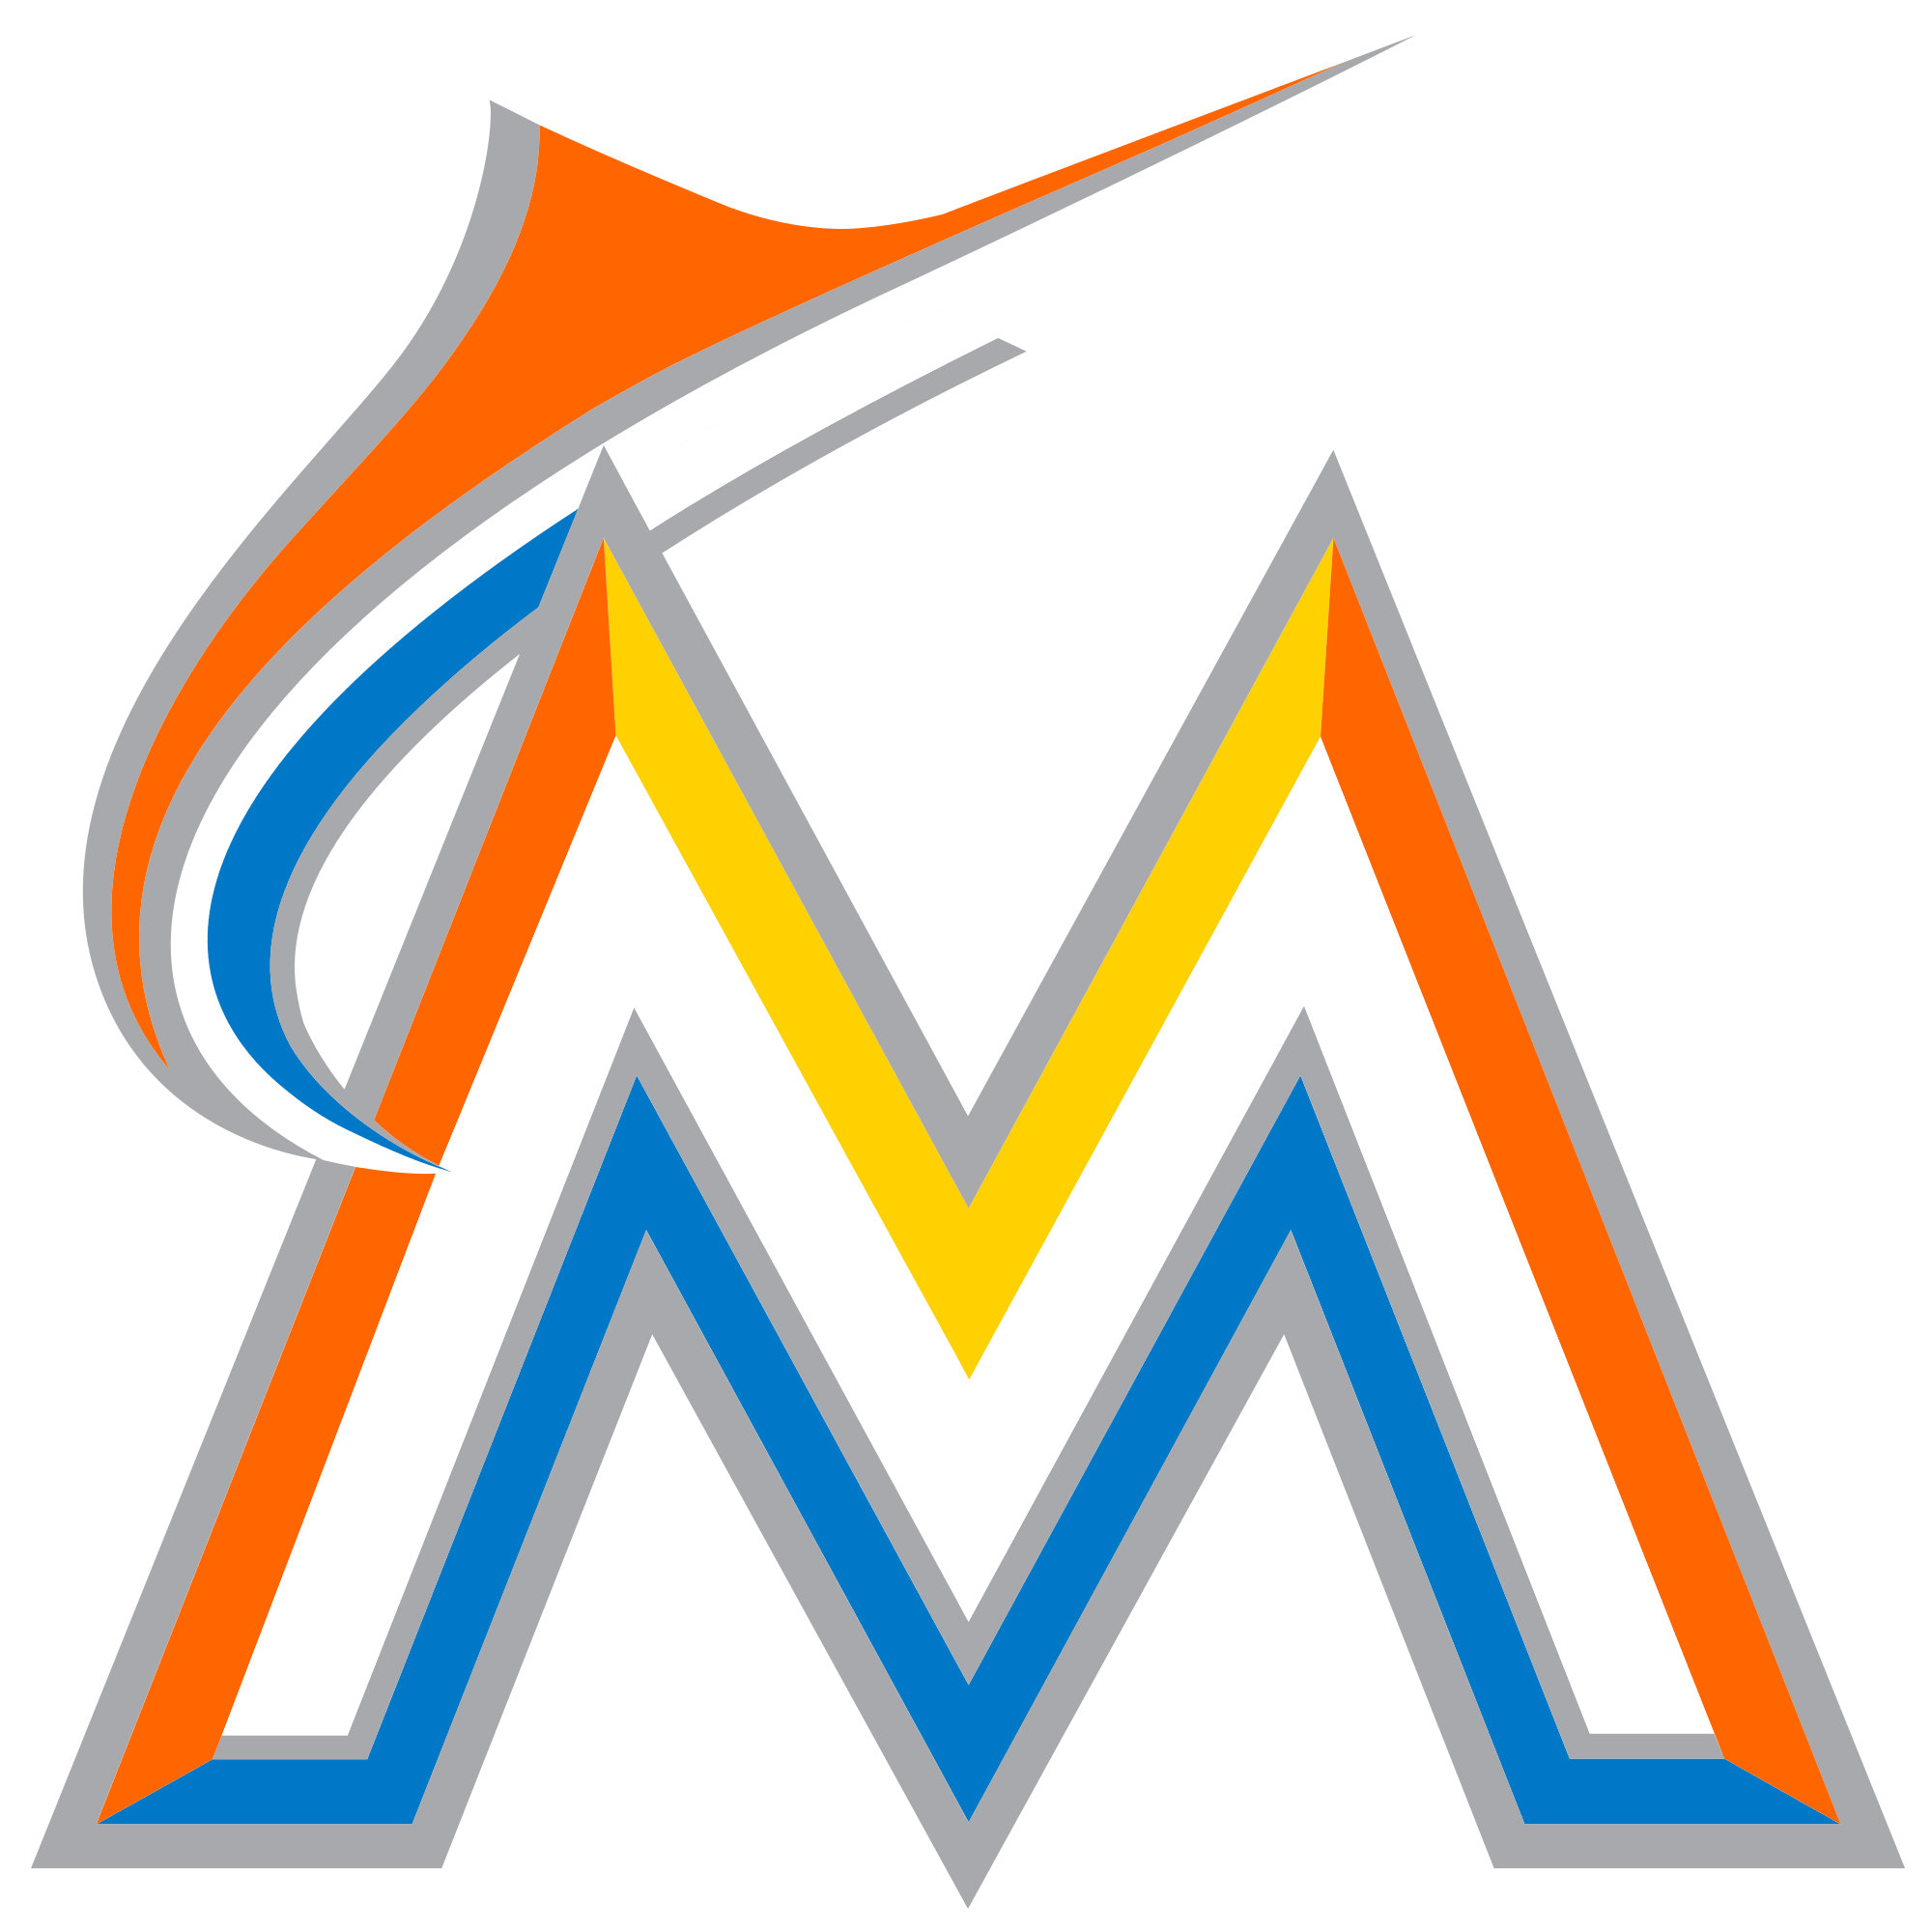 Marlins Old Logo - File:Miami Marlins logo.svg - Wikimedia Commons